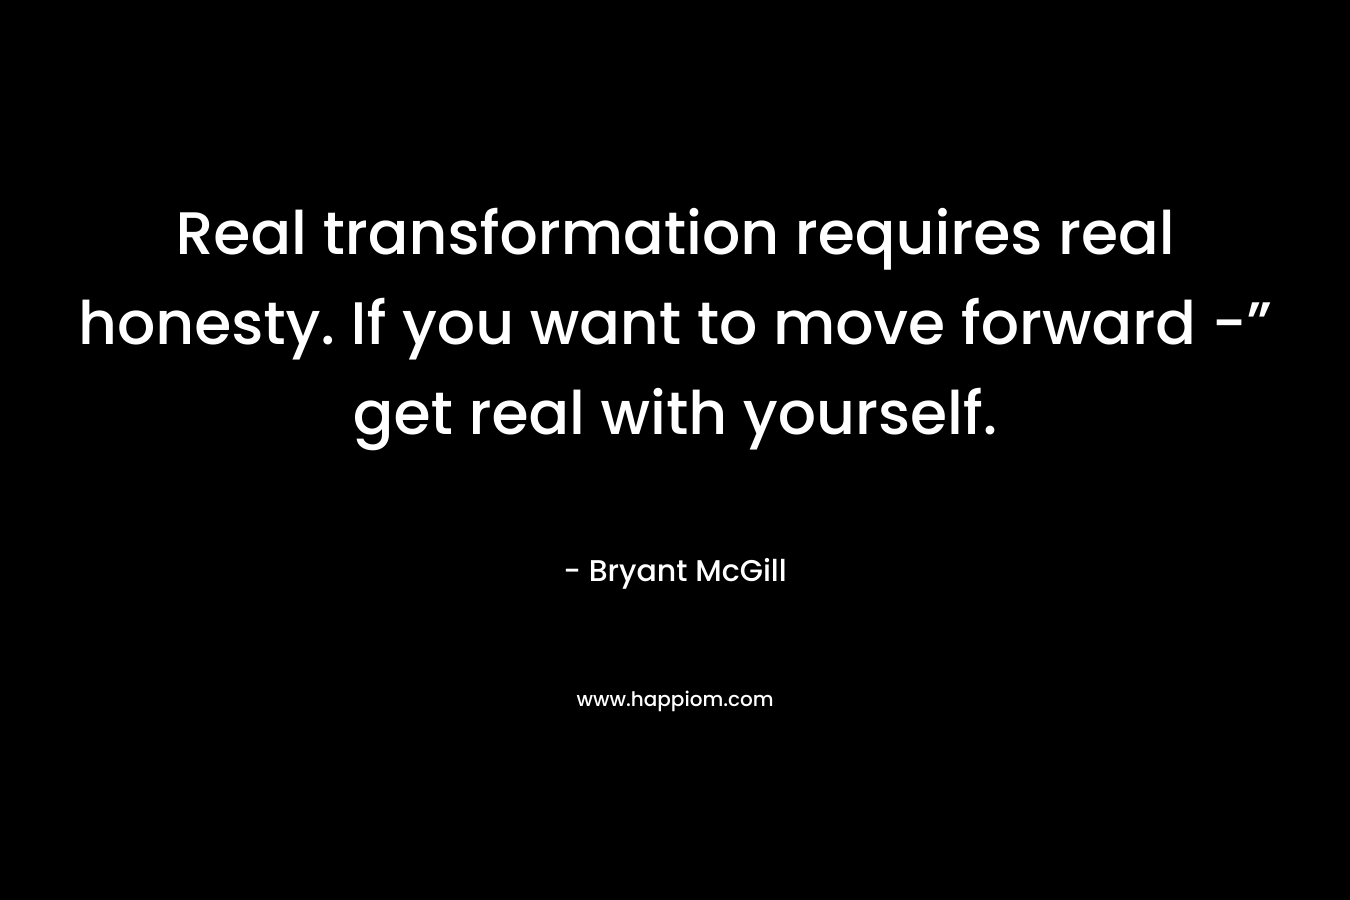 Real transformation requires real honesty. If you want to move forward -” get real with yourself.